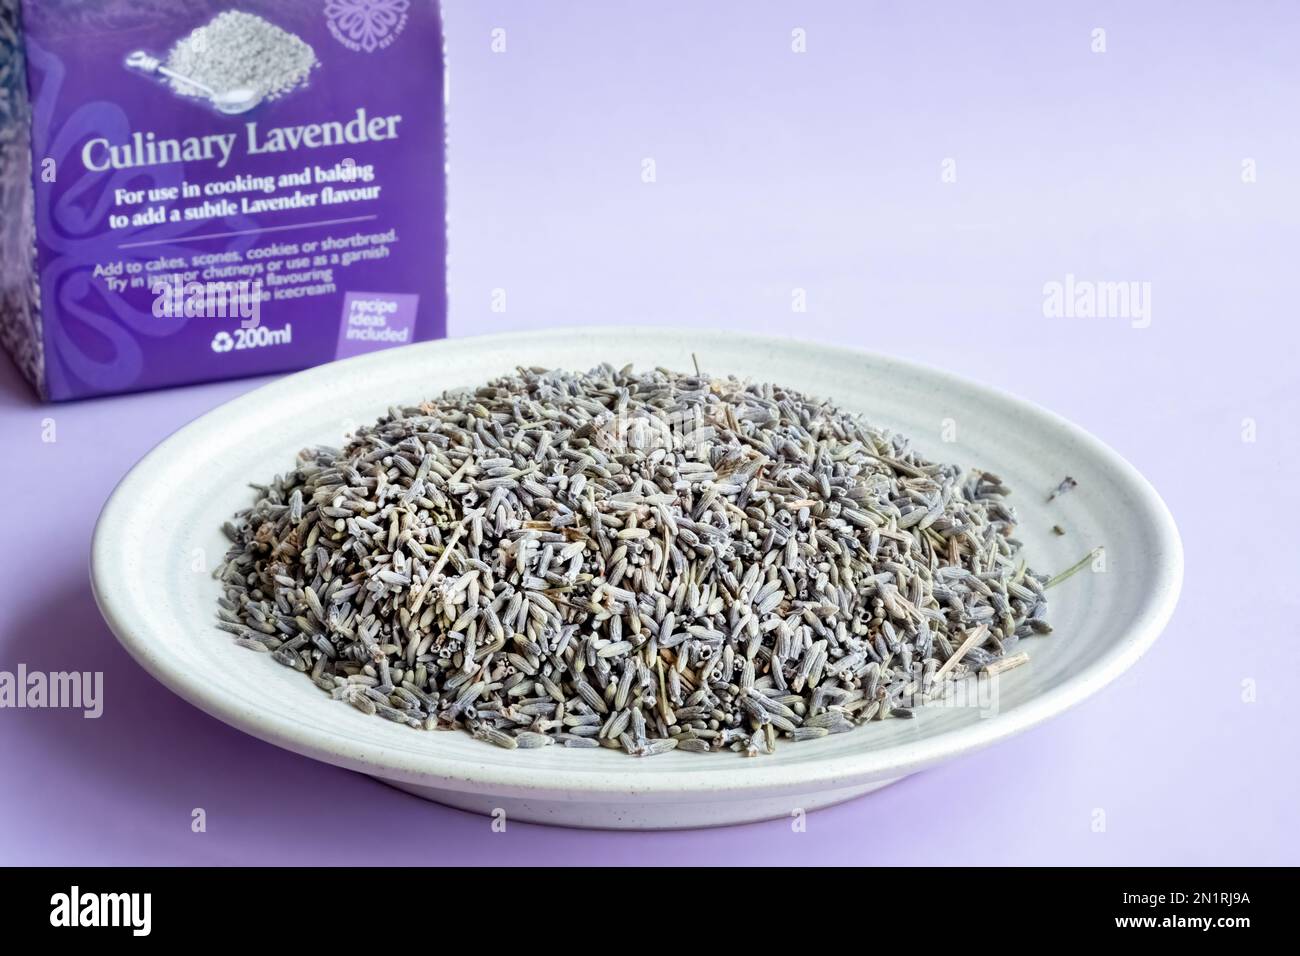 A 200ml packet of culinary lavender. The edible cooking lavender is used for cooking or baking to add a subtle lavender flavour Stock Photo